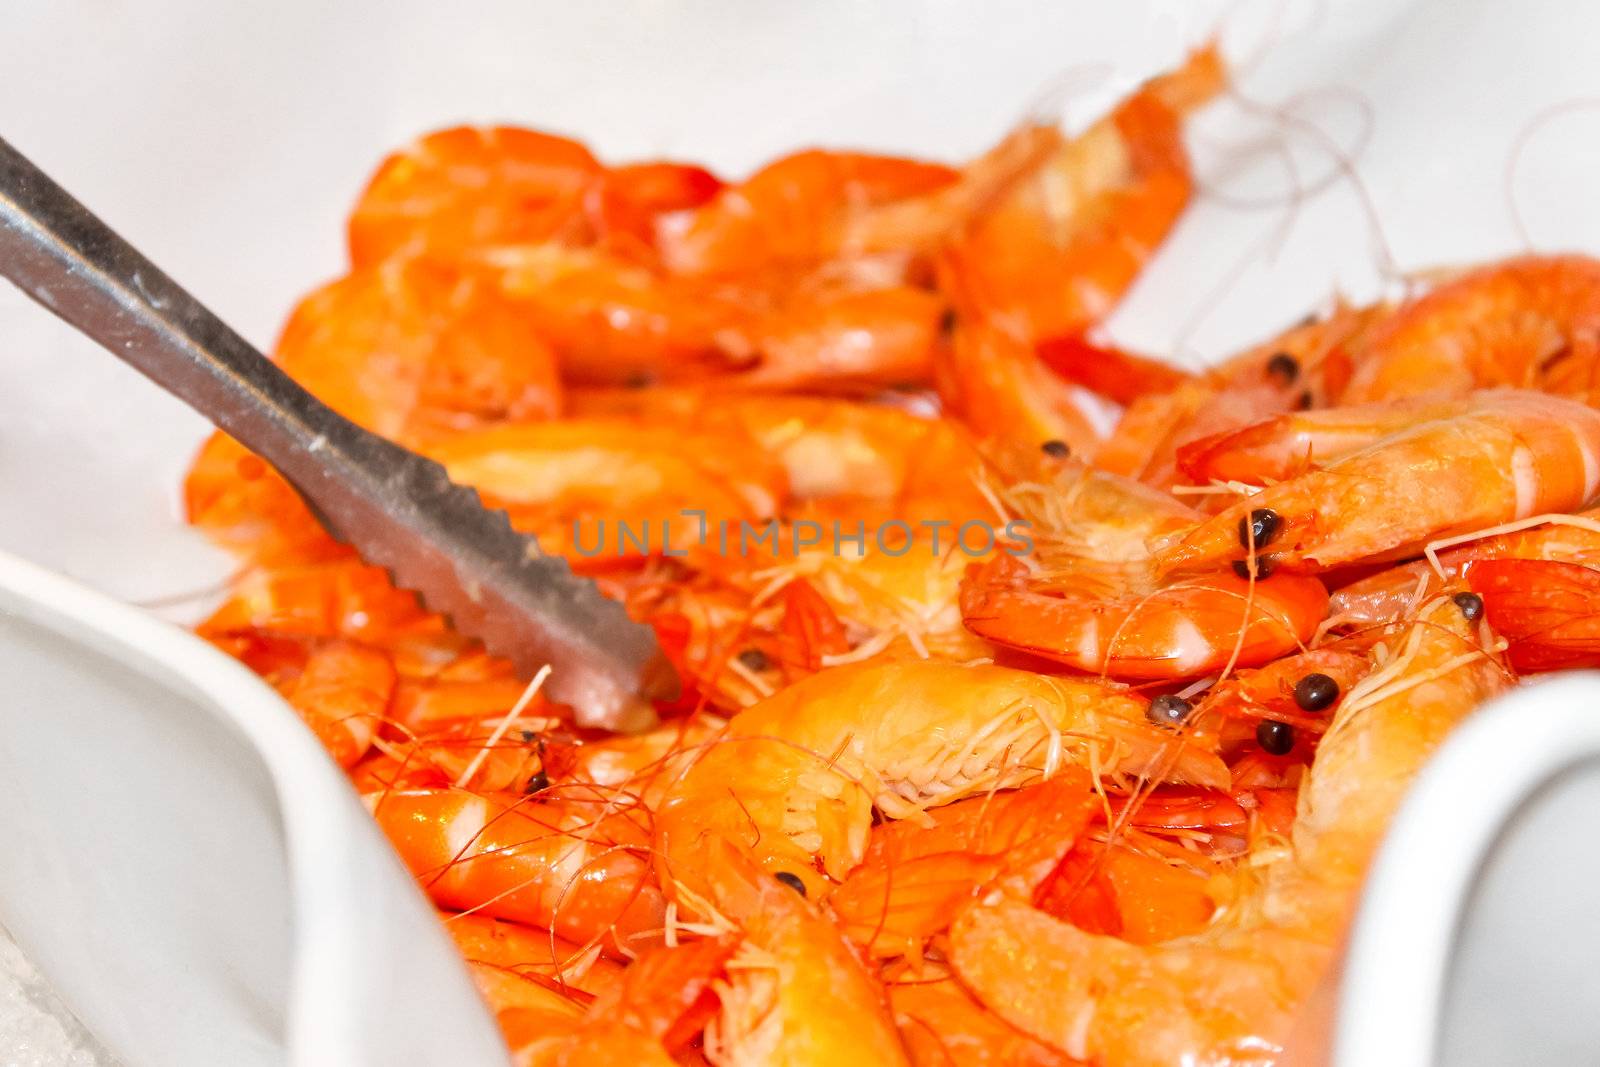 Boiled shrimp in a bowl in a restaurant by NickNick